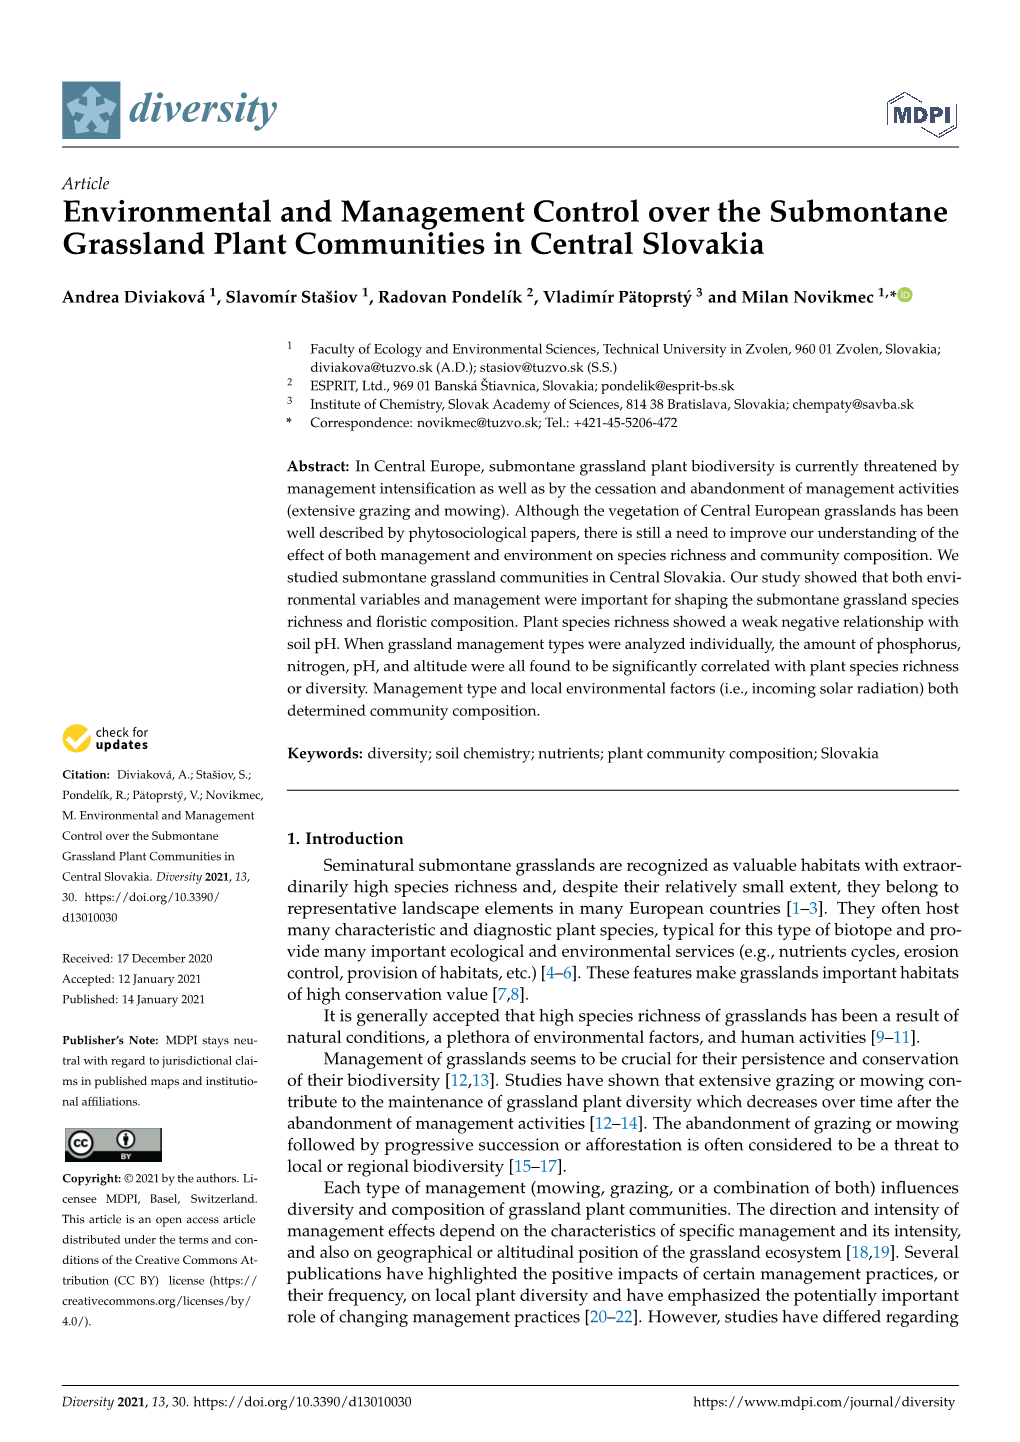 Environmental and Management Control Over the Submontane Grassland Plant Communities in Central Slovakia